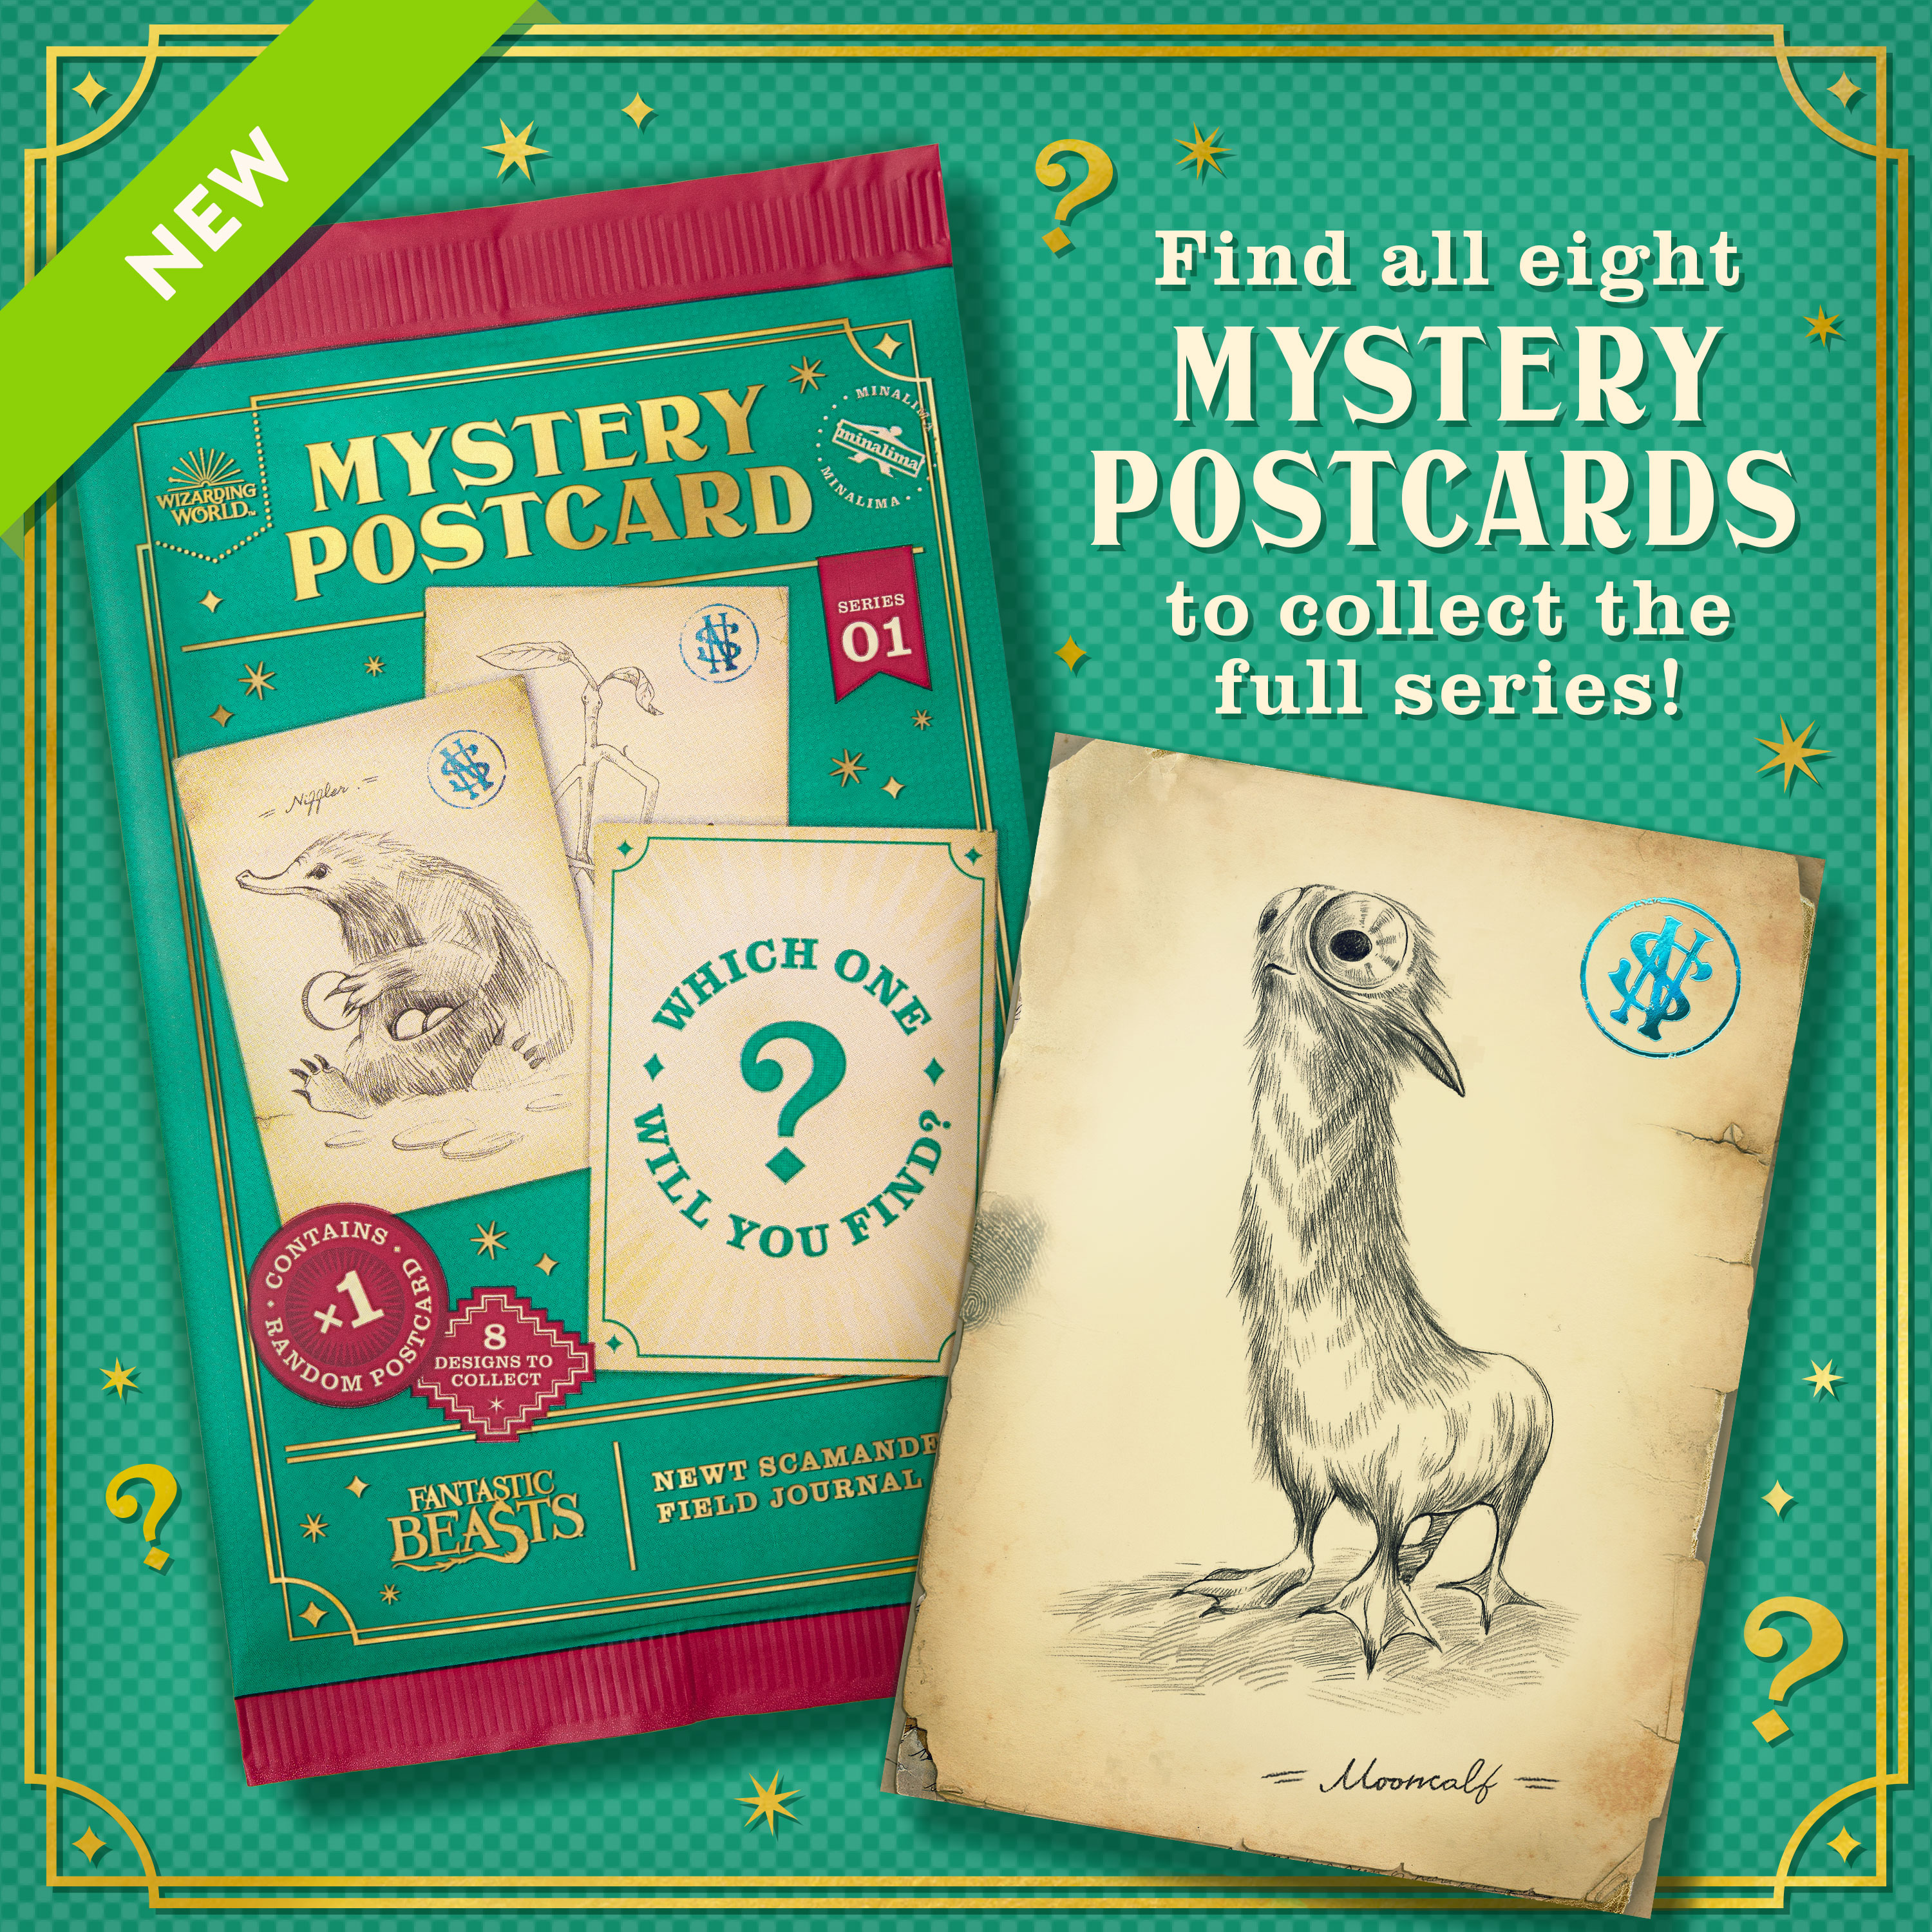 New Mystery Postcards out now!